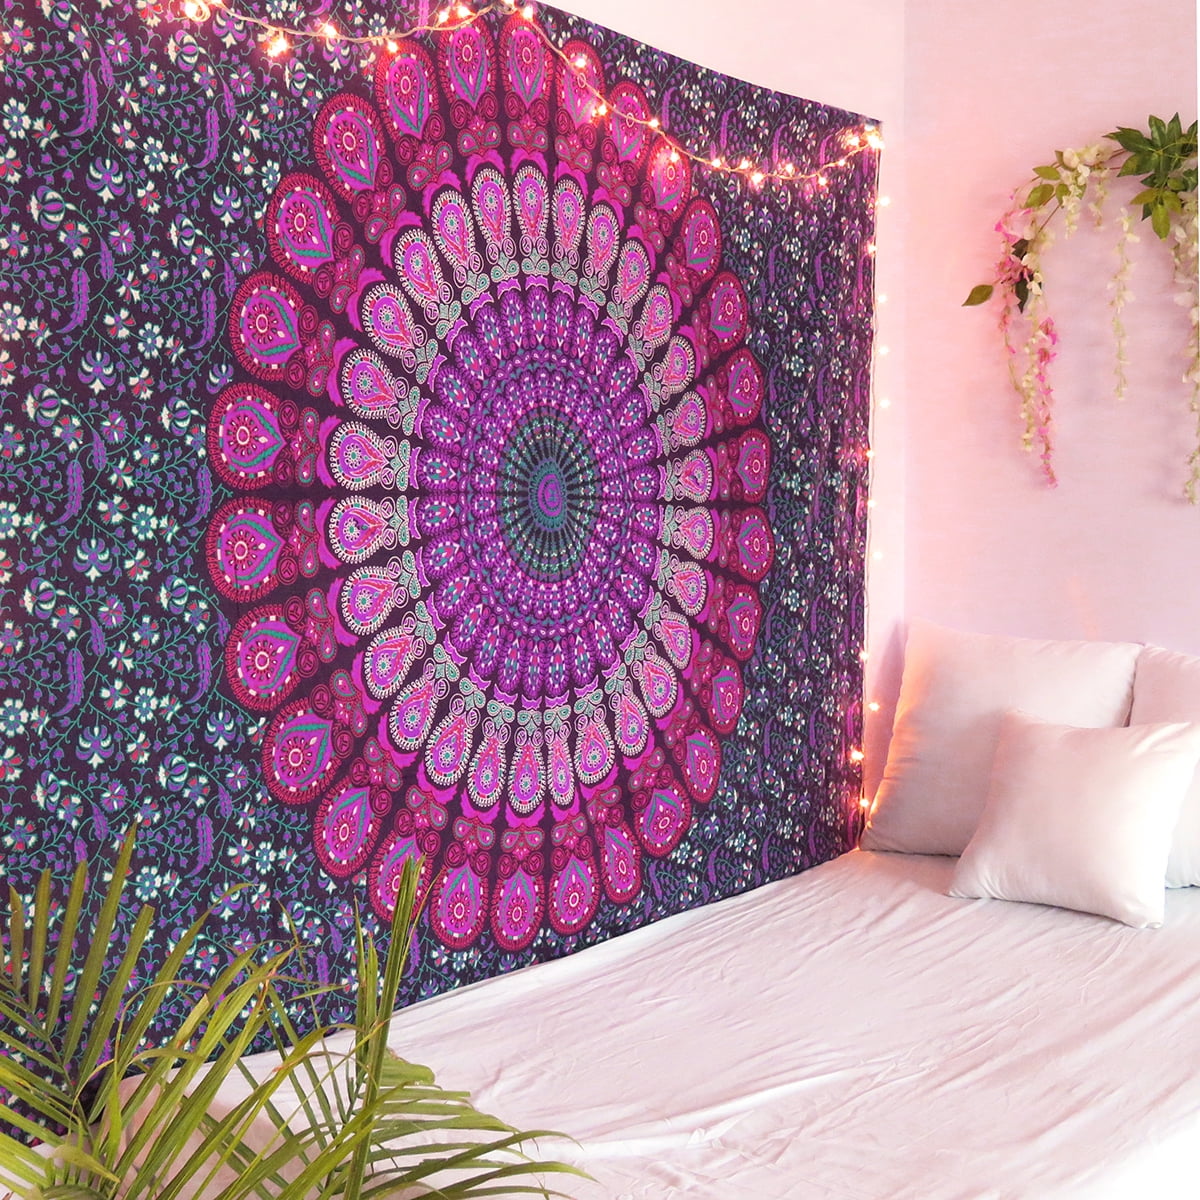 Hippie Bohemian Bedspread Coverlet Indian Wall Art Bedding Tapestry Twin Throw 